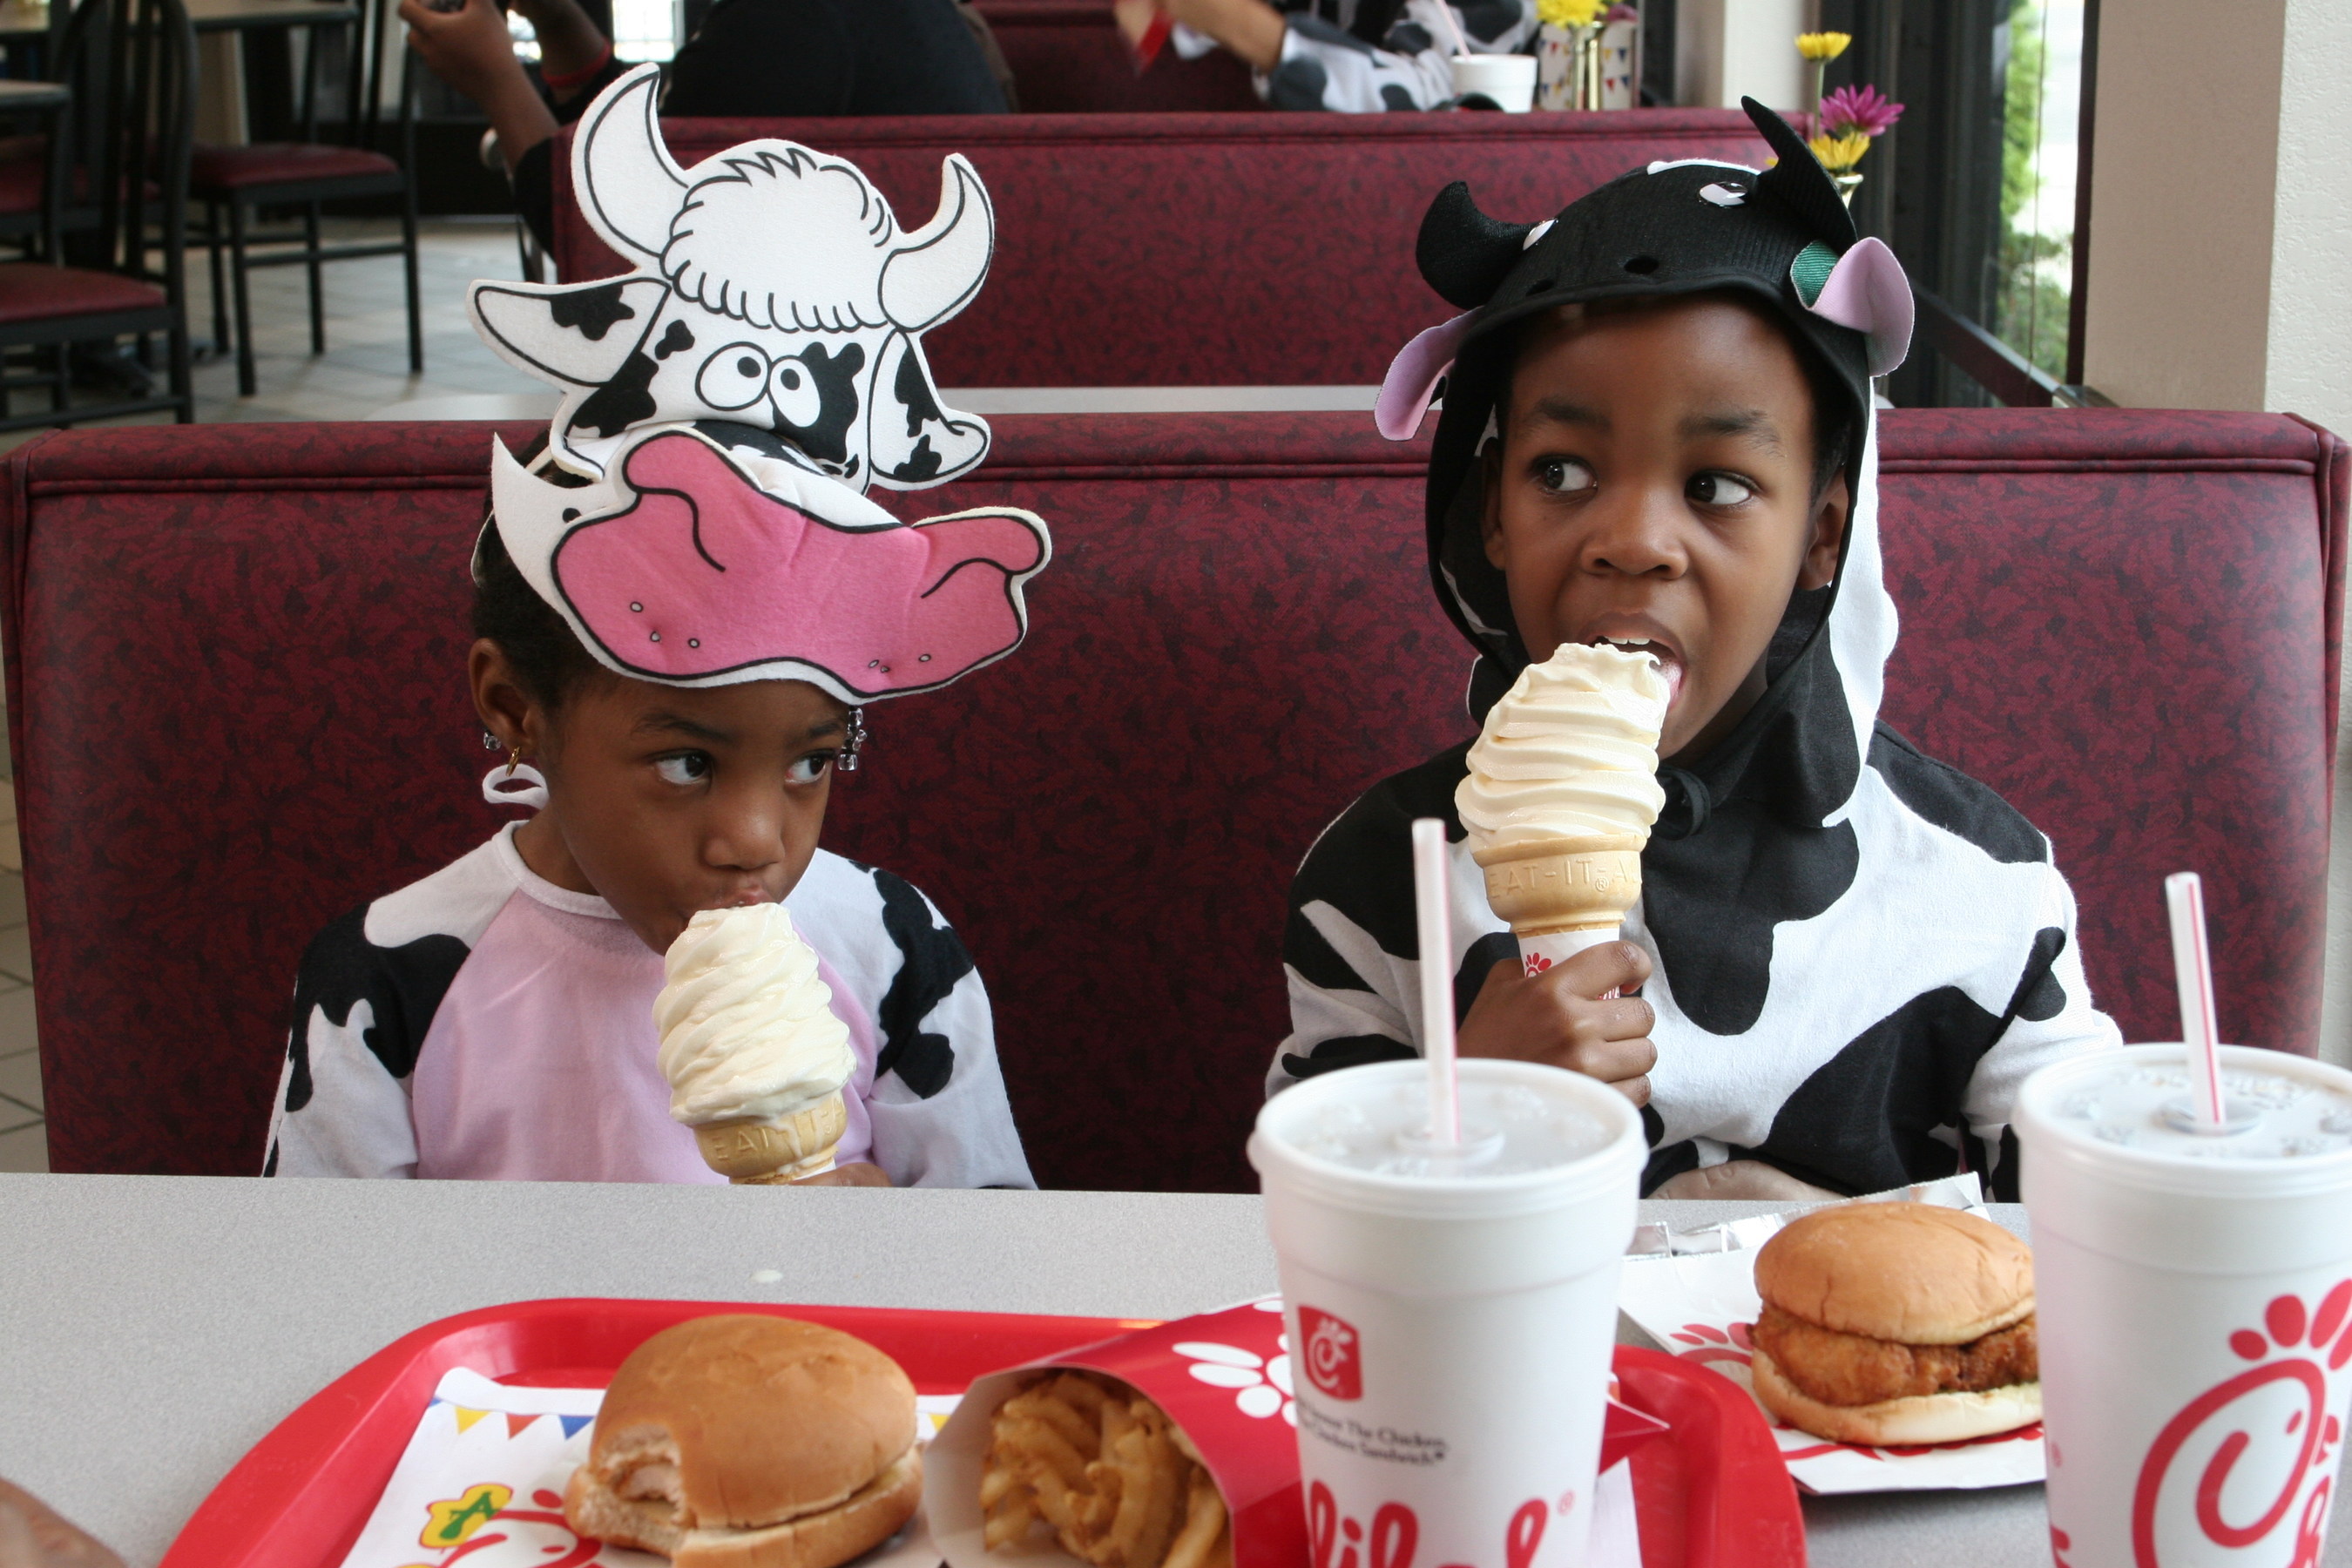 dress-like-a-cow-for-free-chick-fil-a-on-cow-appreciation-day-latf-usa